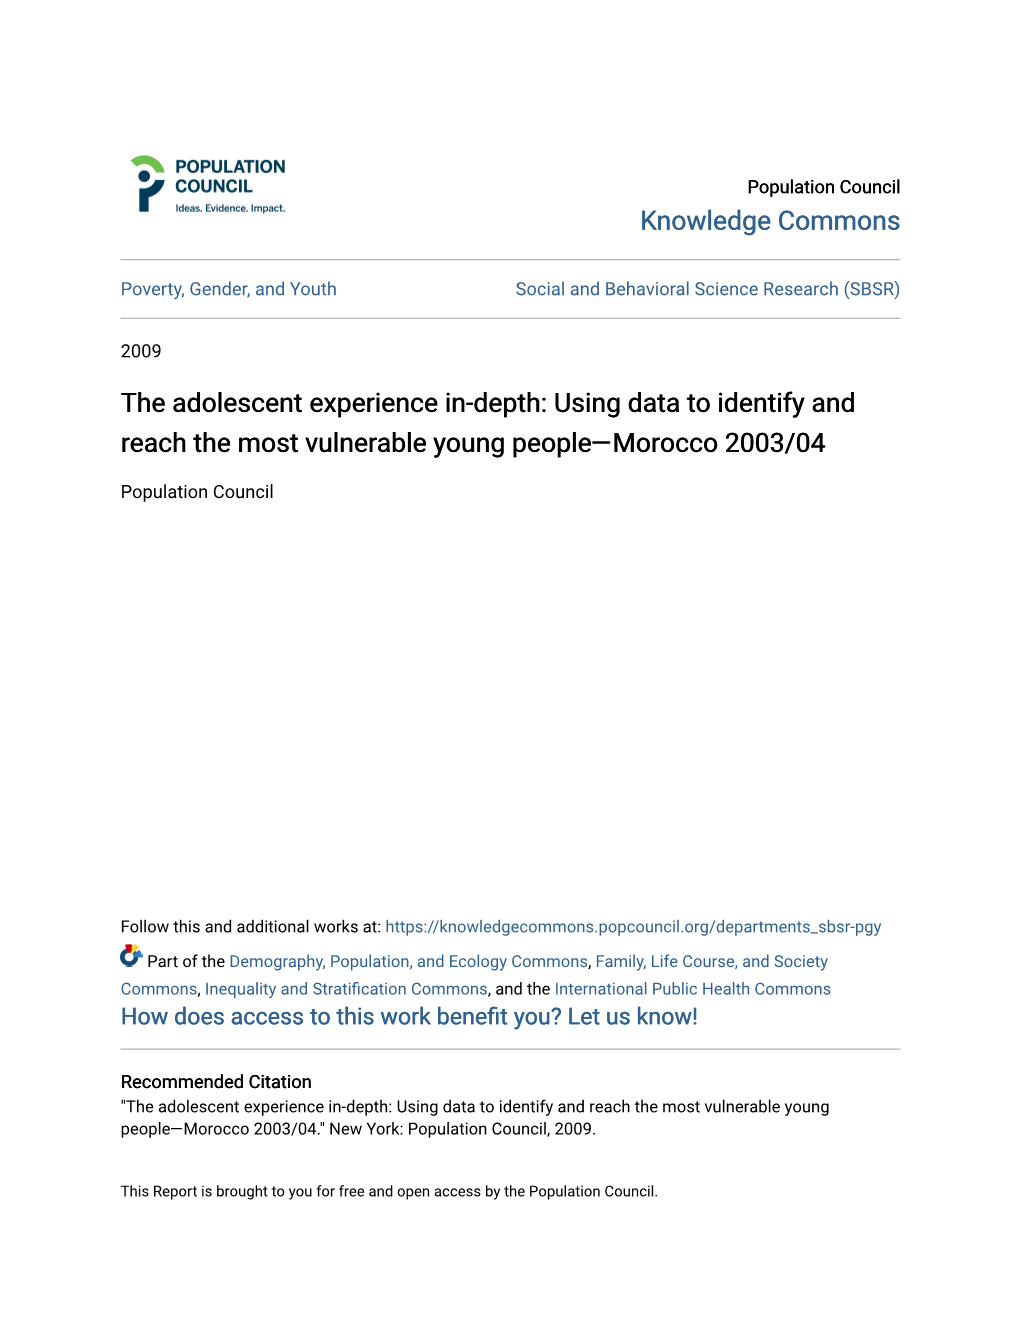 The Adolescent Experience In-Depth: Using Data to Identify and Reach the Most Vulnerable Young People—Morocco 2003/04